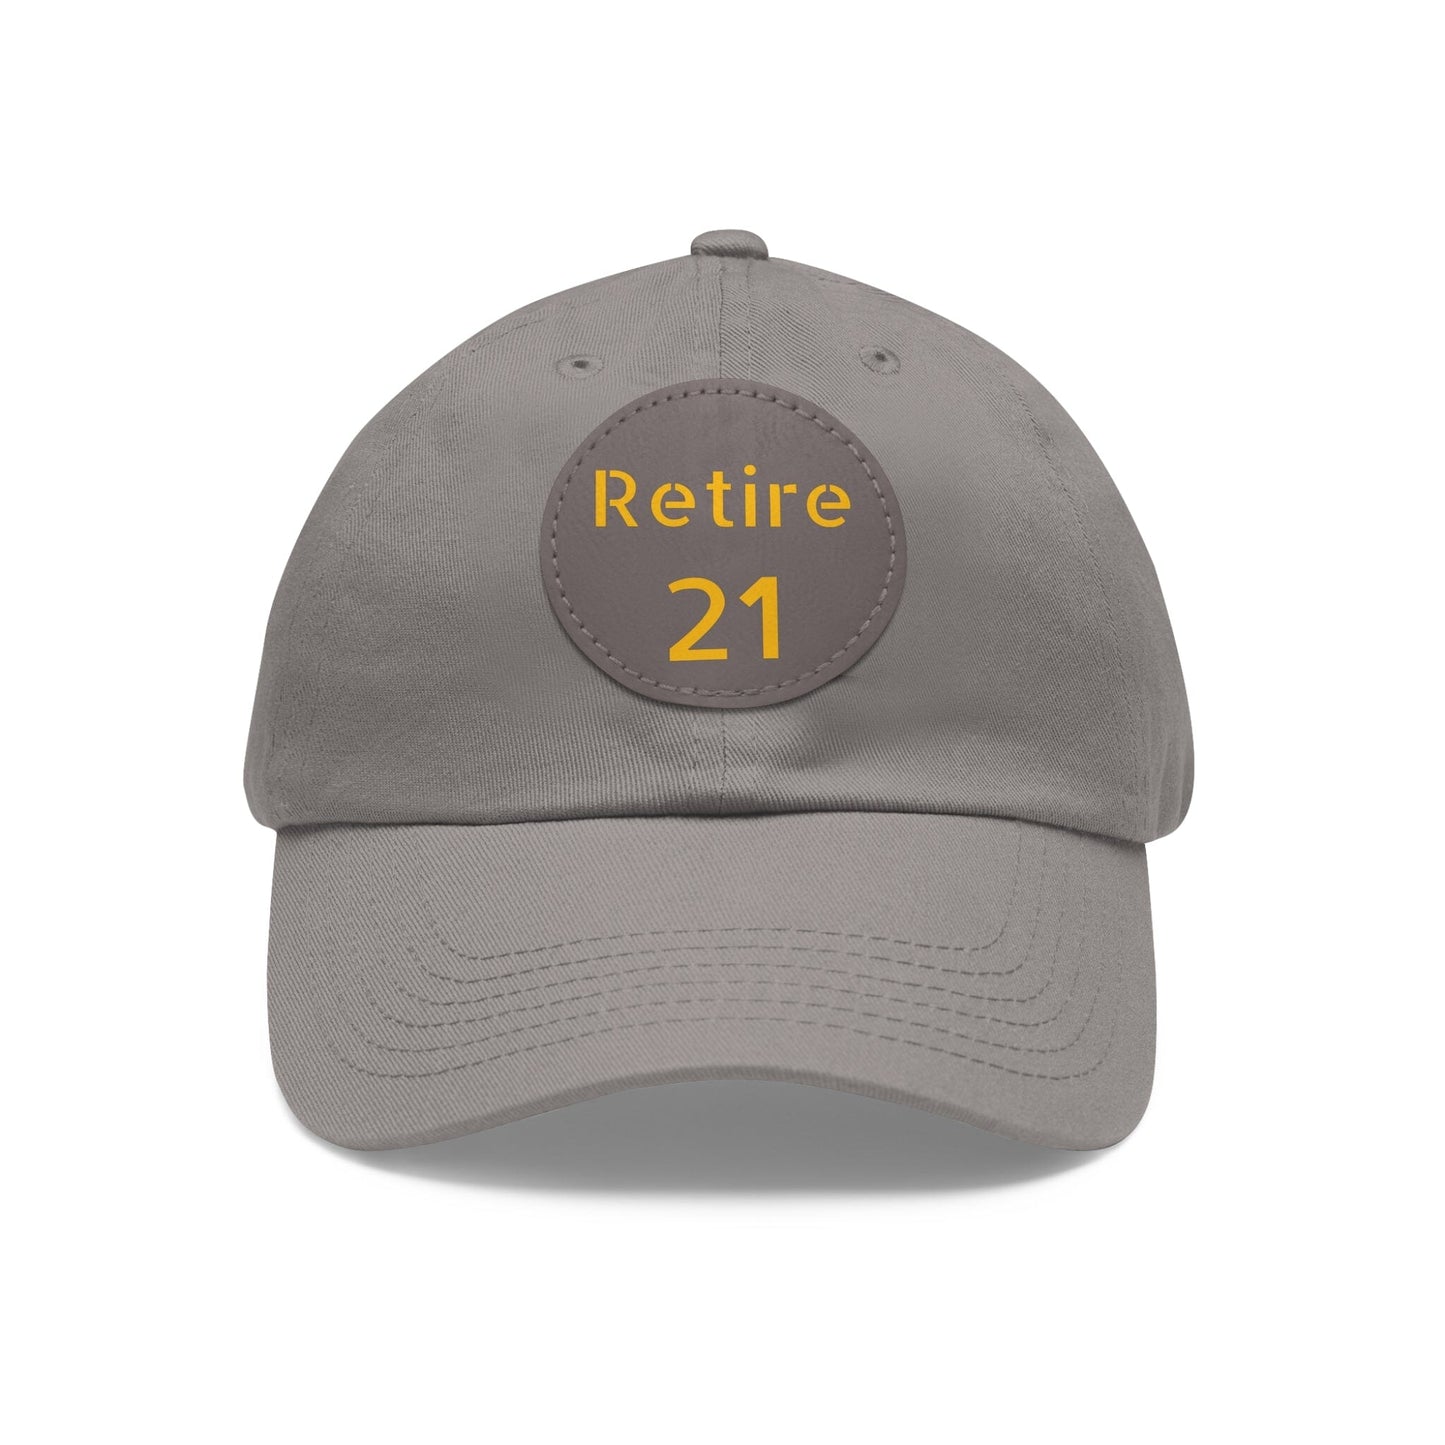 Retire 21 Hat With Leather Patch Hats Yinzergear Grey / Grey patch Circle One size